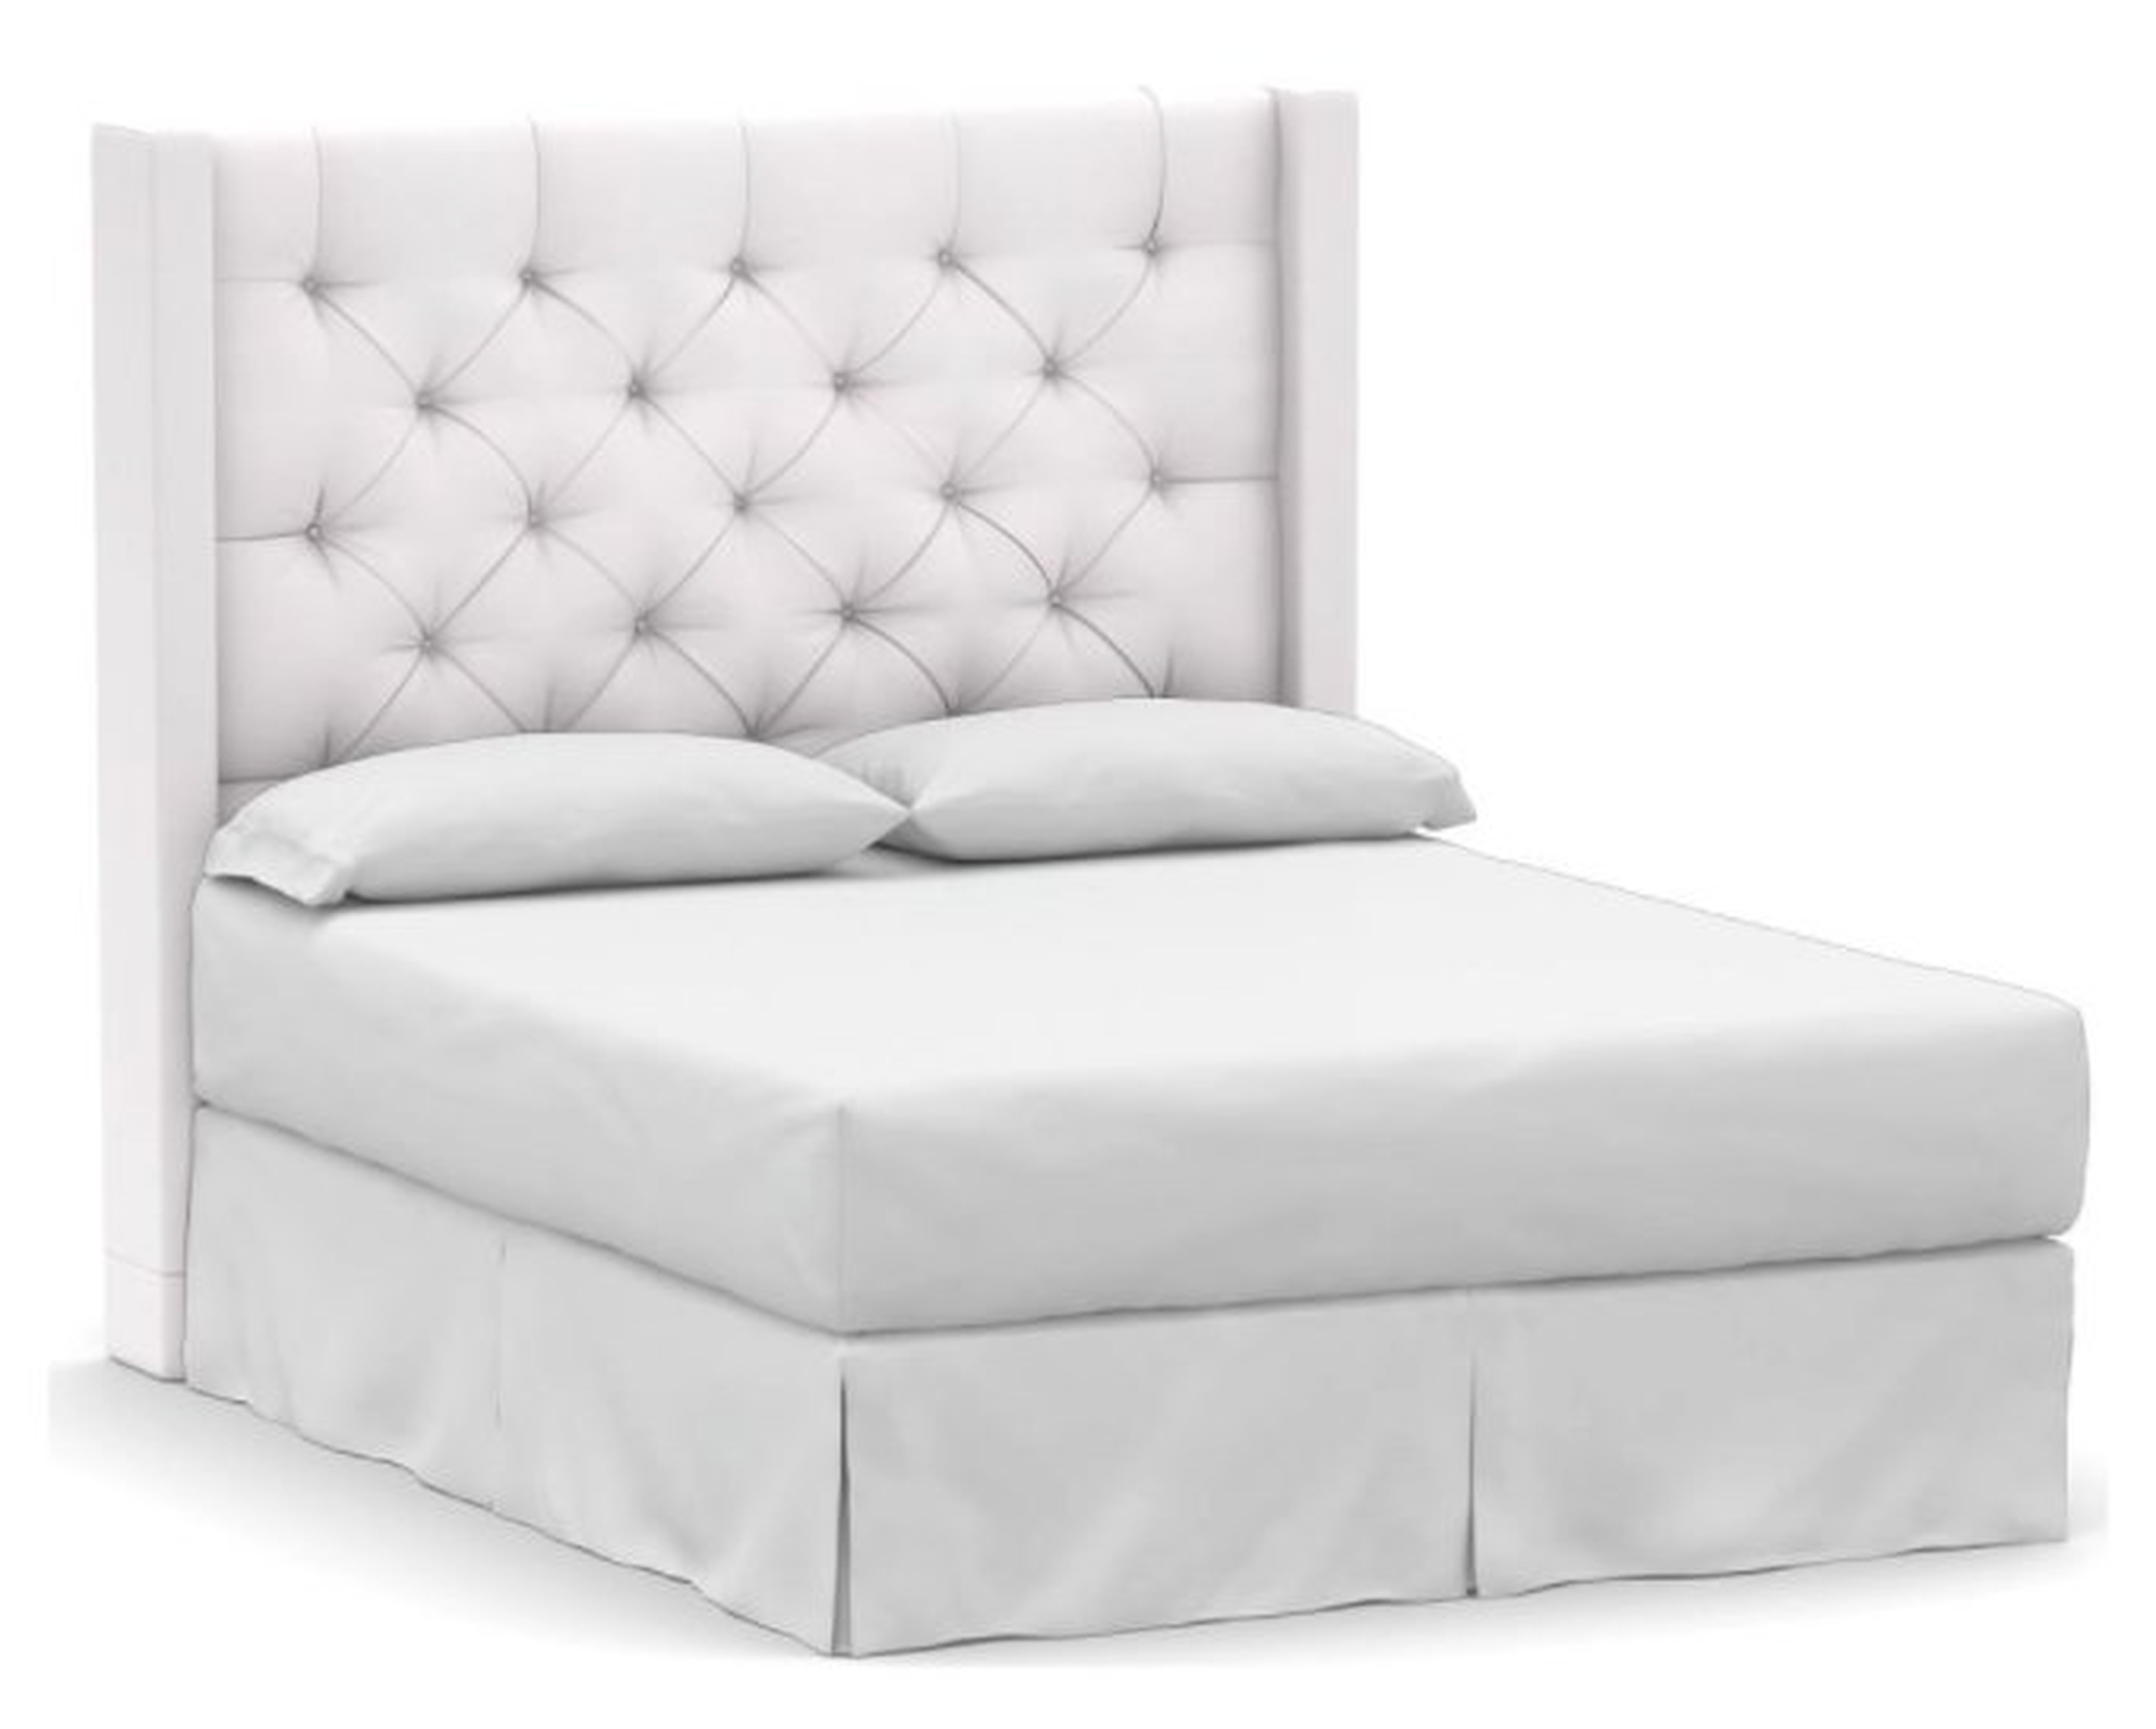 Harper Tufted Upholstered Tall Headboard 65"h, without Nailheads, Full, Twill White - Pottery Barn